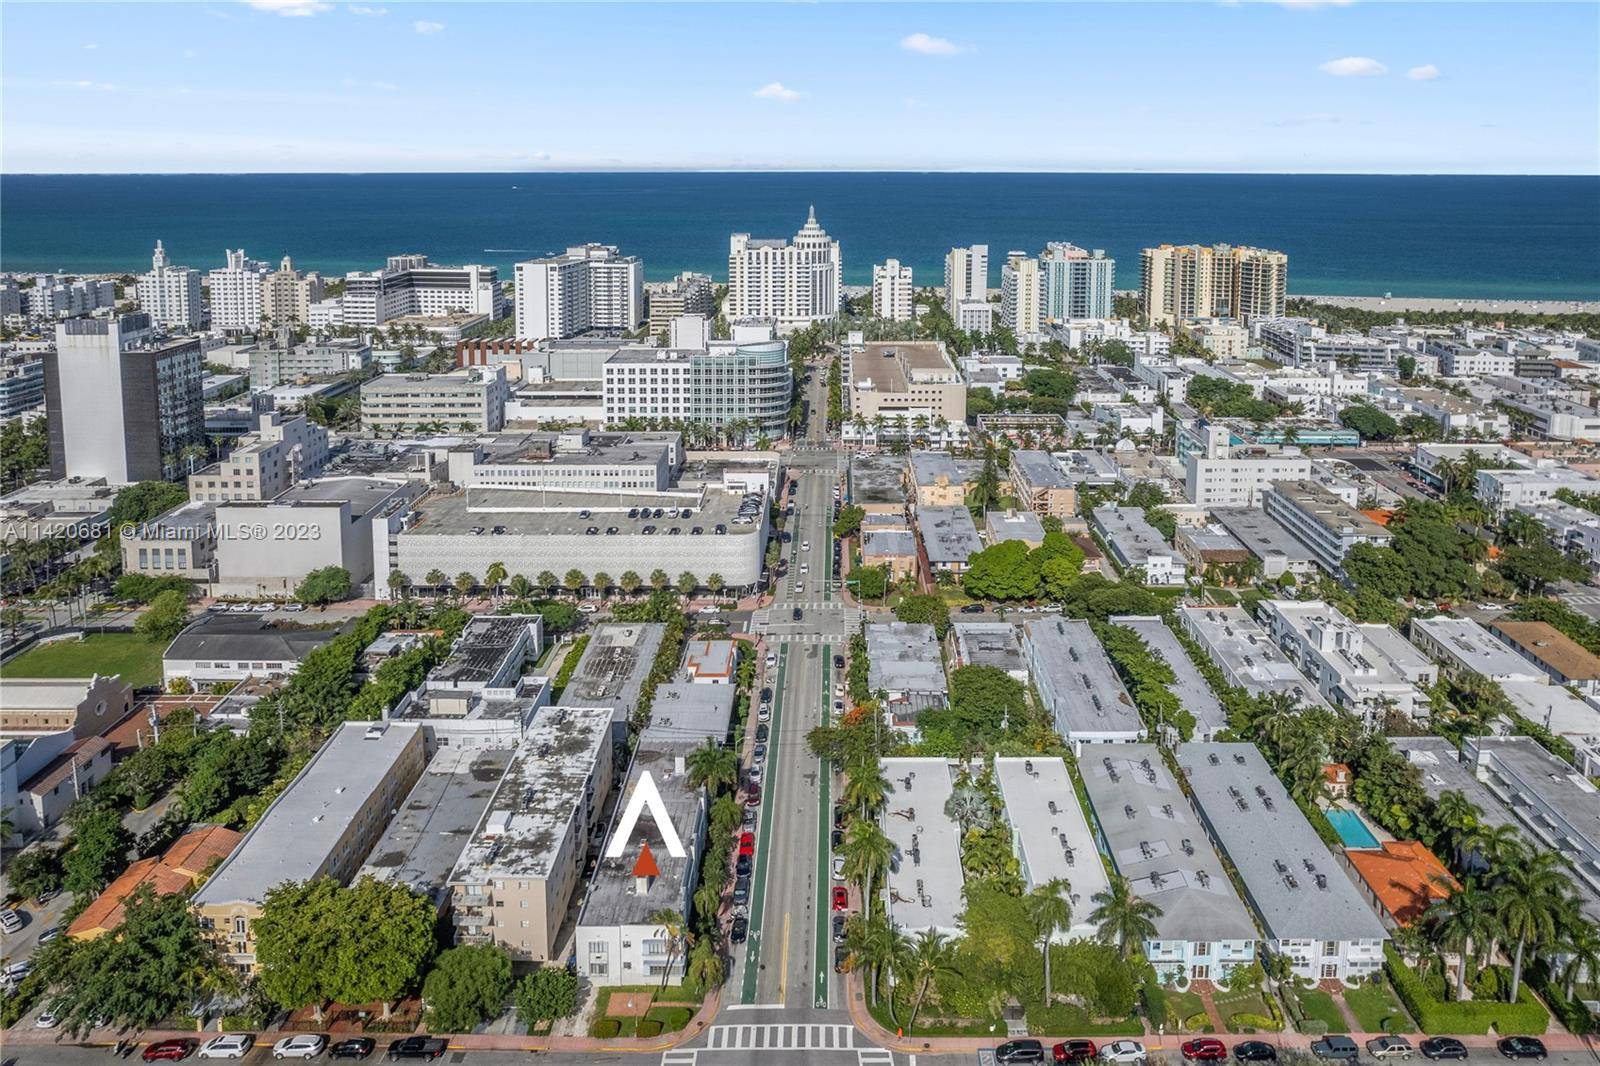 Unique opportunity to acquire this Land Lease with excellent income producing 14 unit multifamily building in the heart of South Beach.